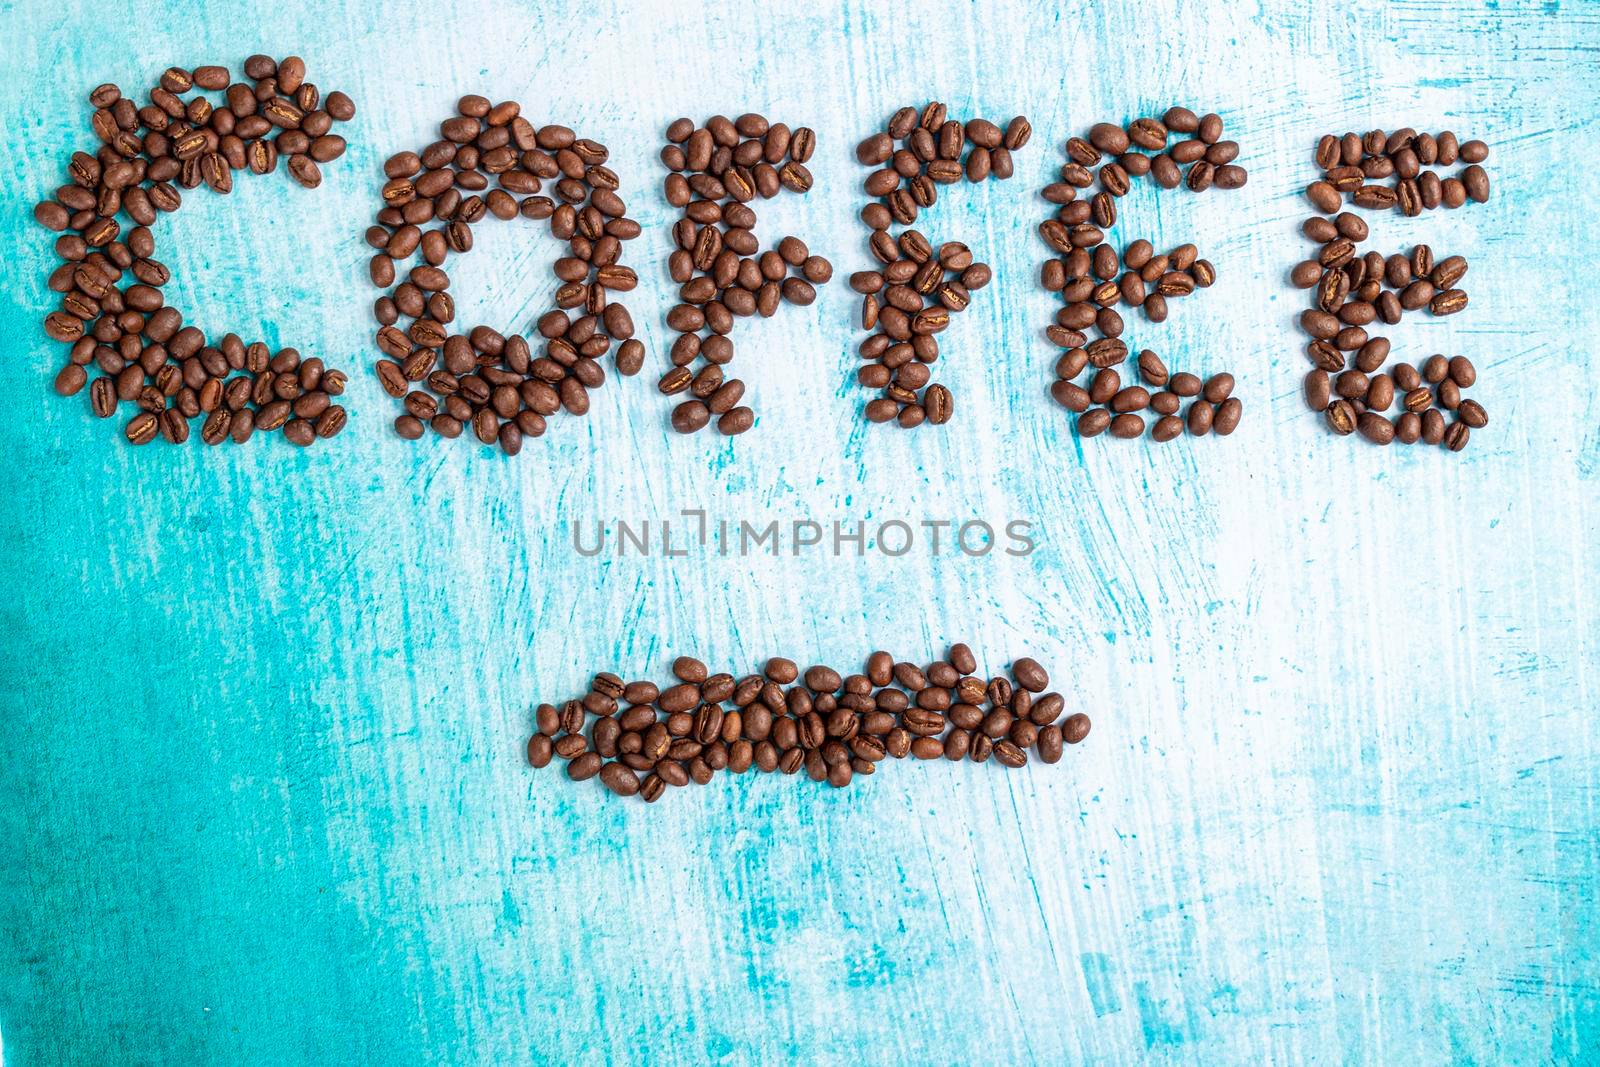 Roasted coffee grains on aquamarine background by eagg13